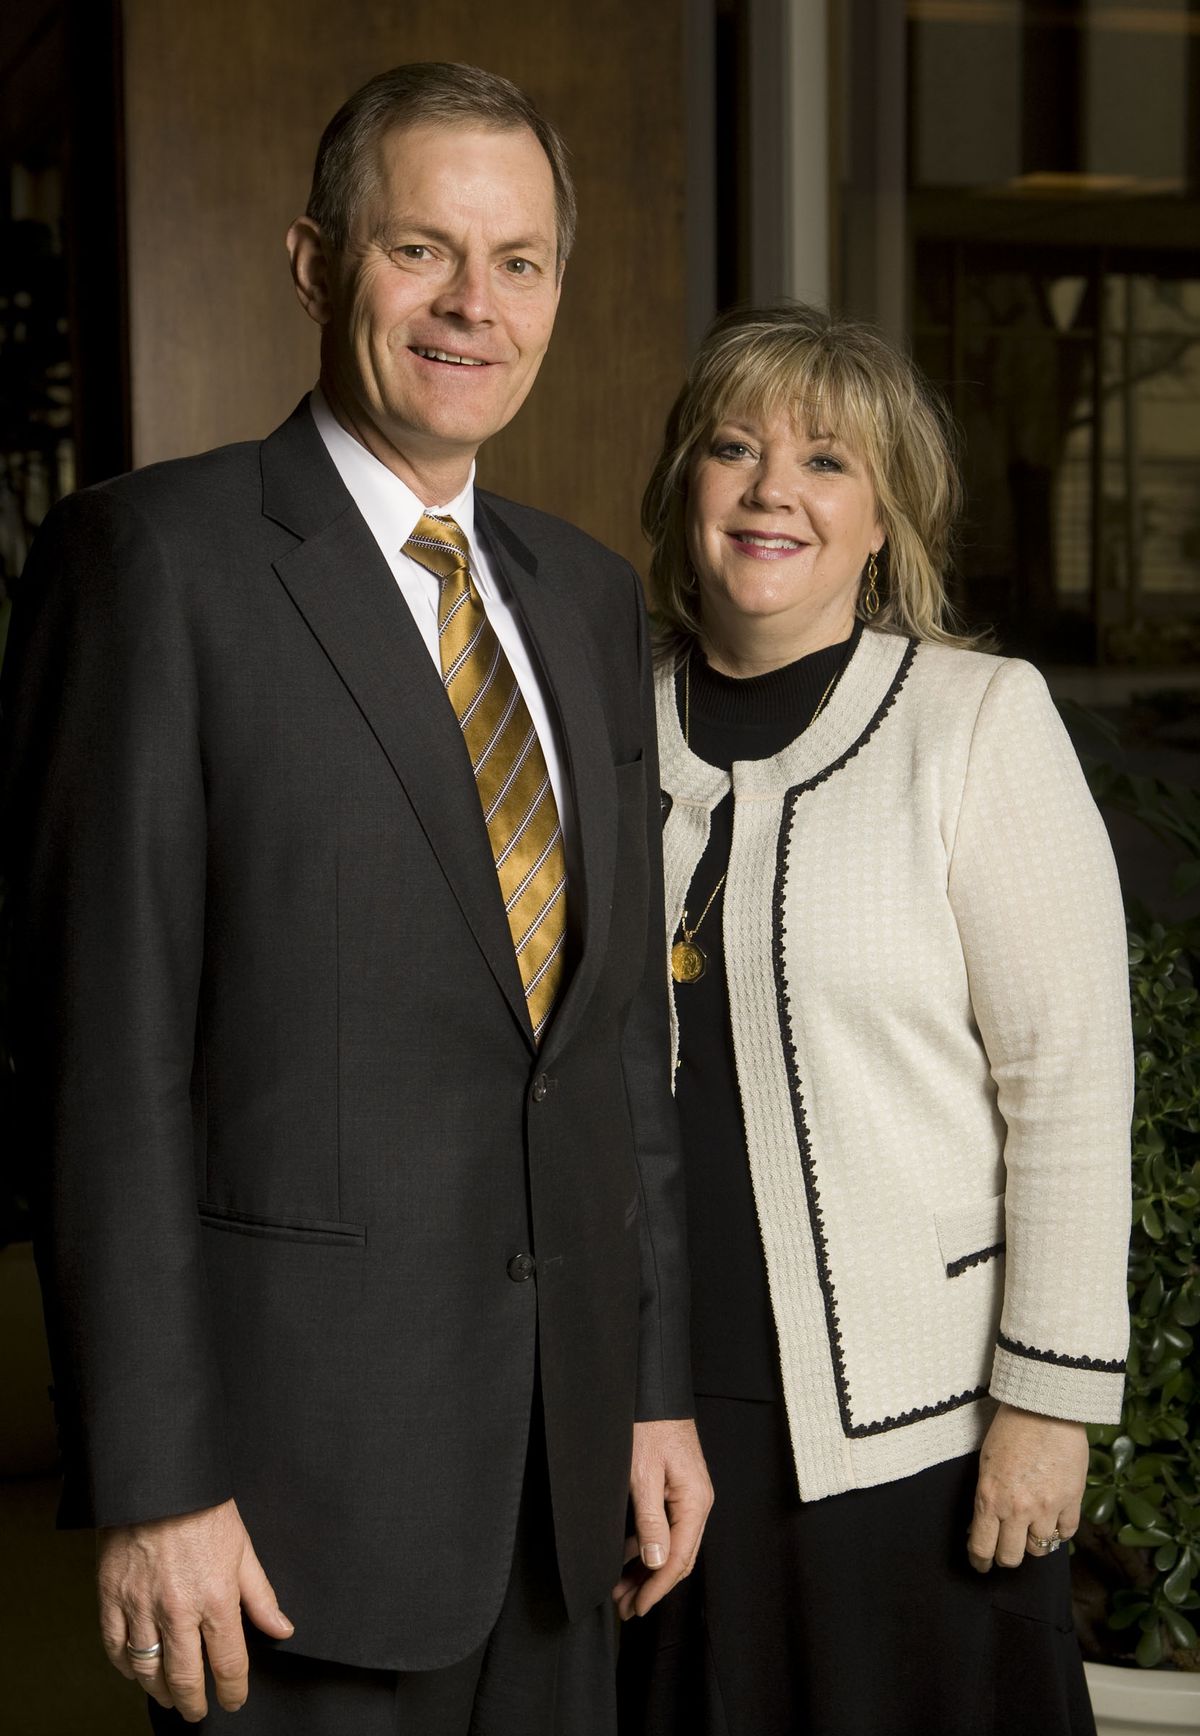 Bishop Gary E. Stevenson and sister Lesa Jean Stevenson pose for a photo in the Church Office Building. Bishop Stevenson was called as the Church Presiding Bishop. New General Authorities and Auxiliary leaders Monday, April 2, 2012.